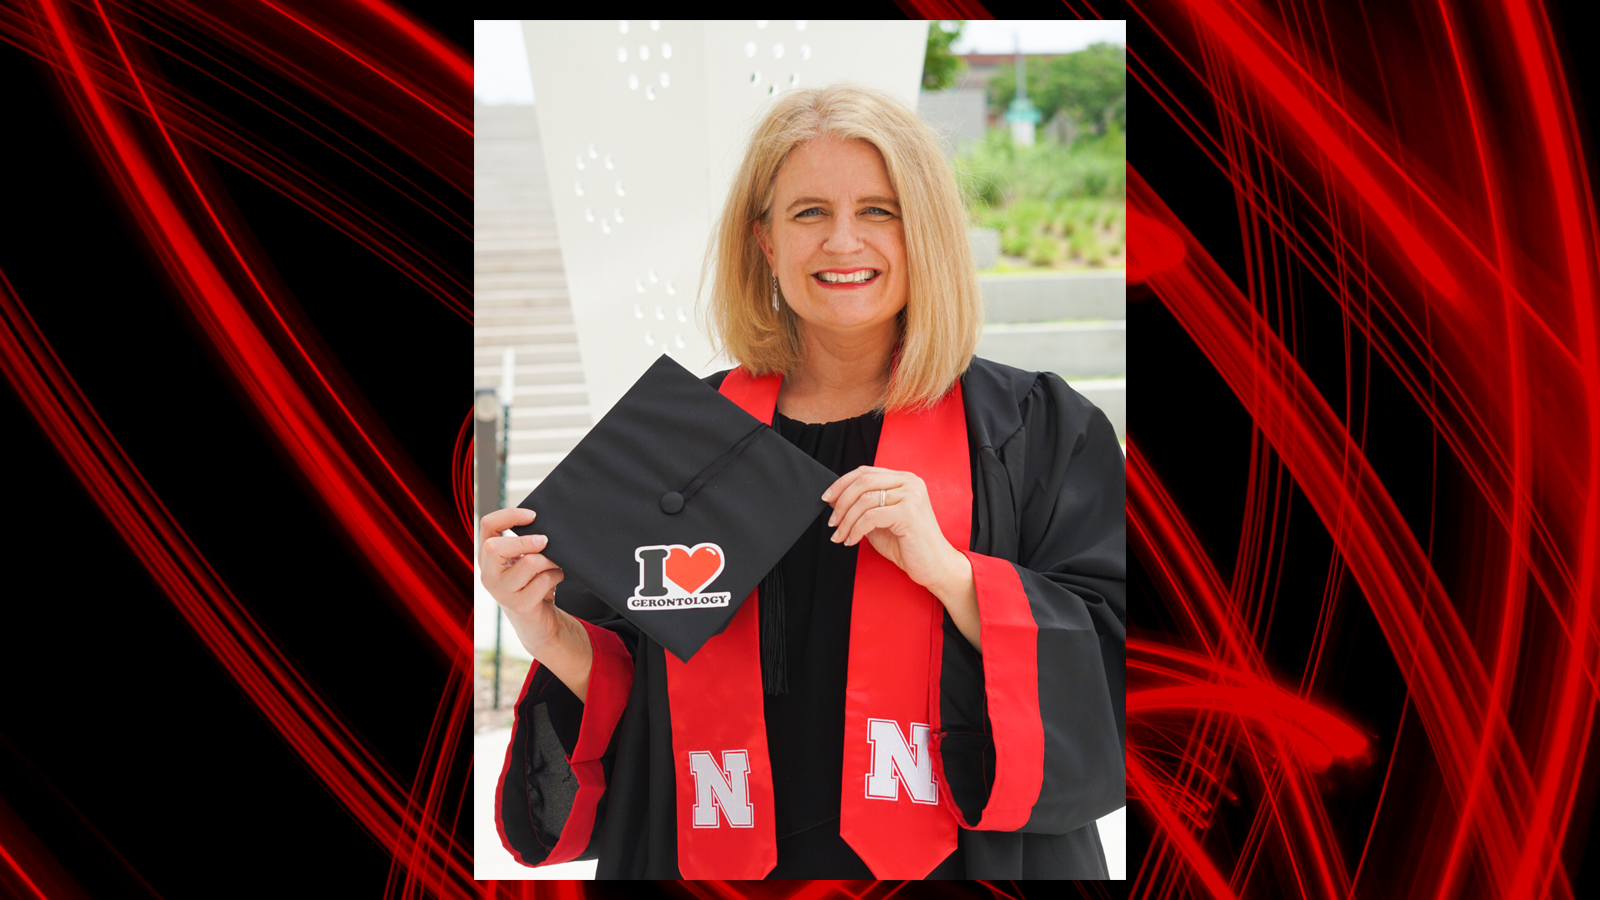 Kristin Johnson poses in her graduation regalia holding her mortar board that has a "I heart gerontology" sticker; black background with red brush strokes